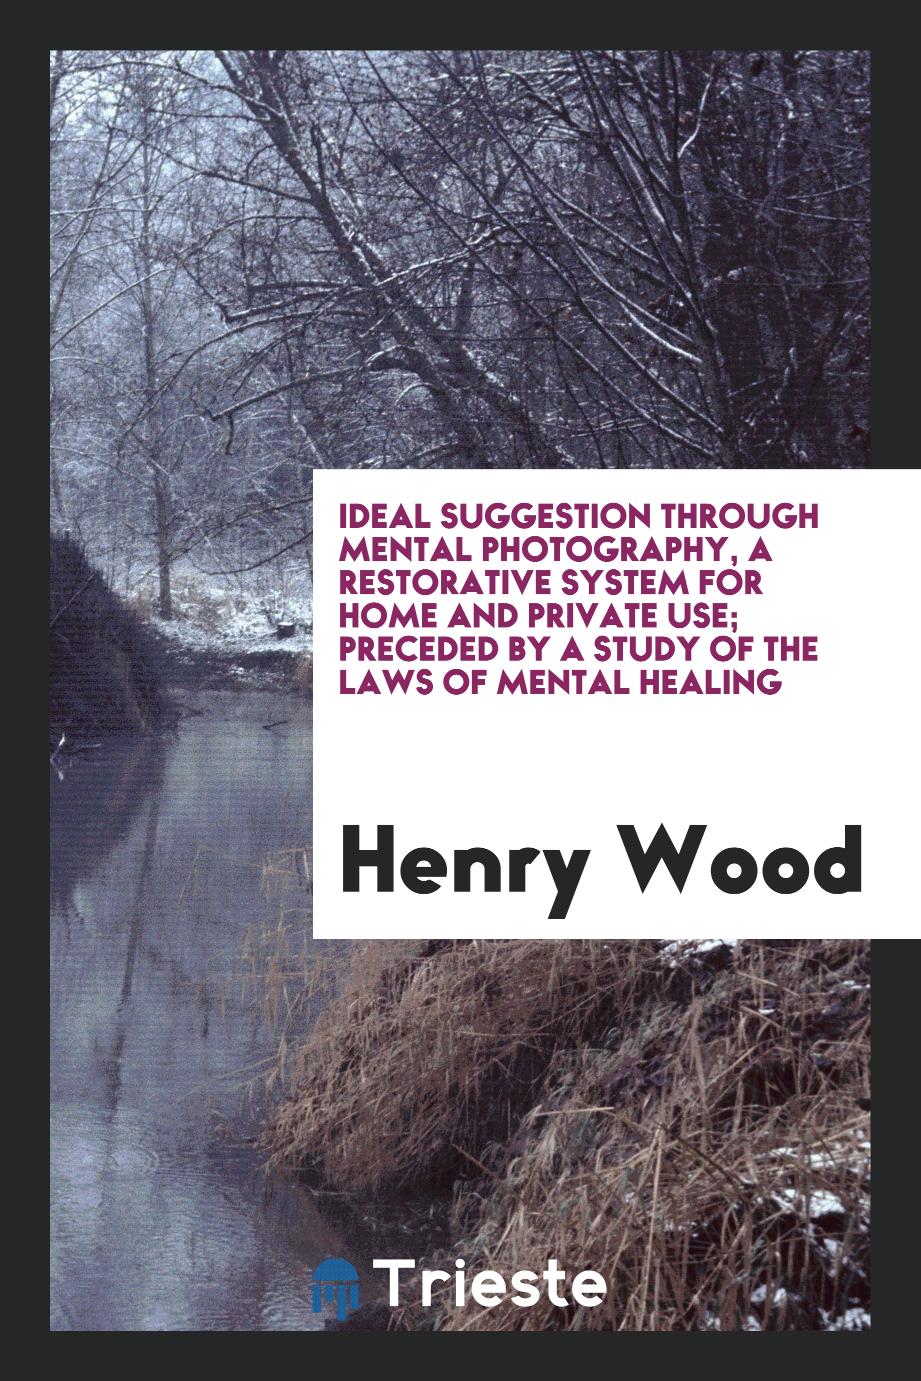 Ideal Suggestion Through Mental Photography, a Restorative System For Home and Private Use; Preceded by a Study of the Laws of Mental Healing